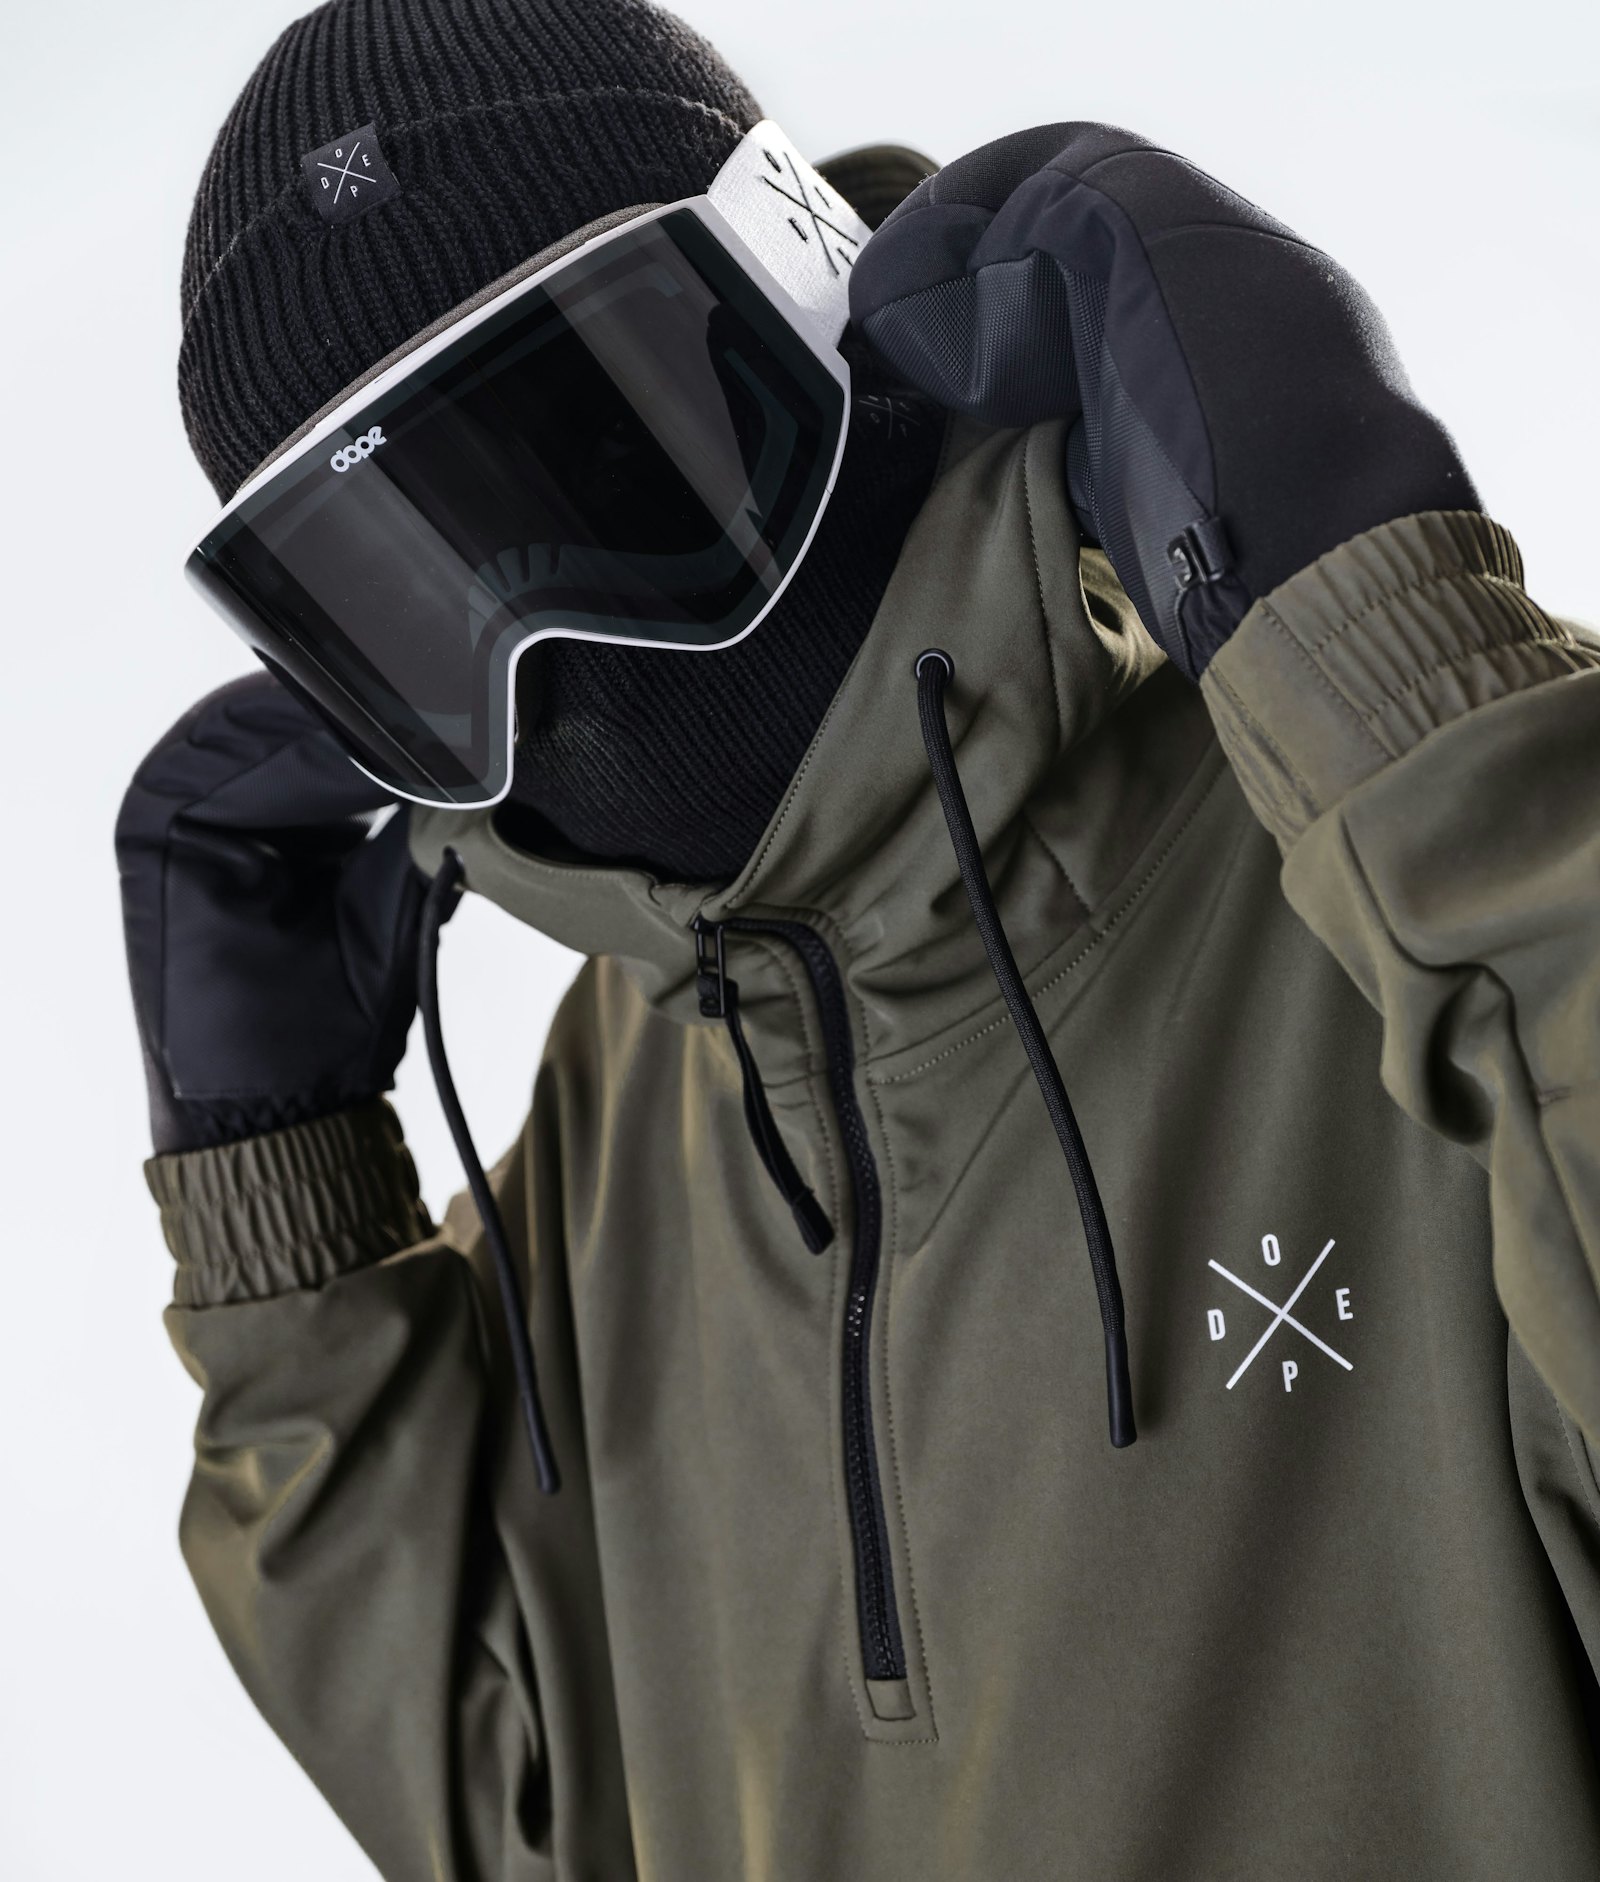 Cyclone 2020 Veste Snowboard Homme Olive Green